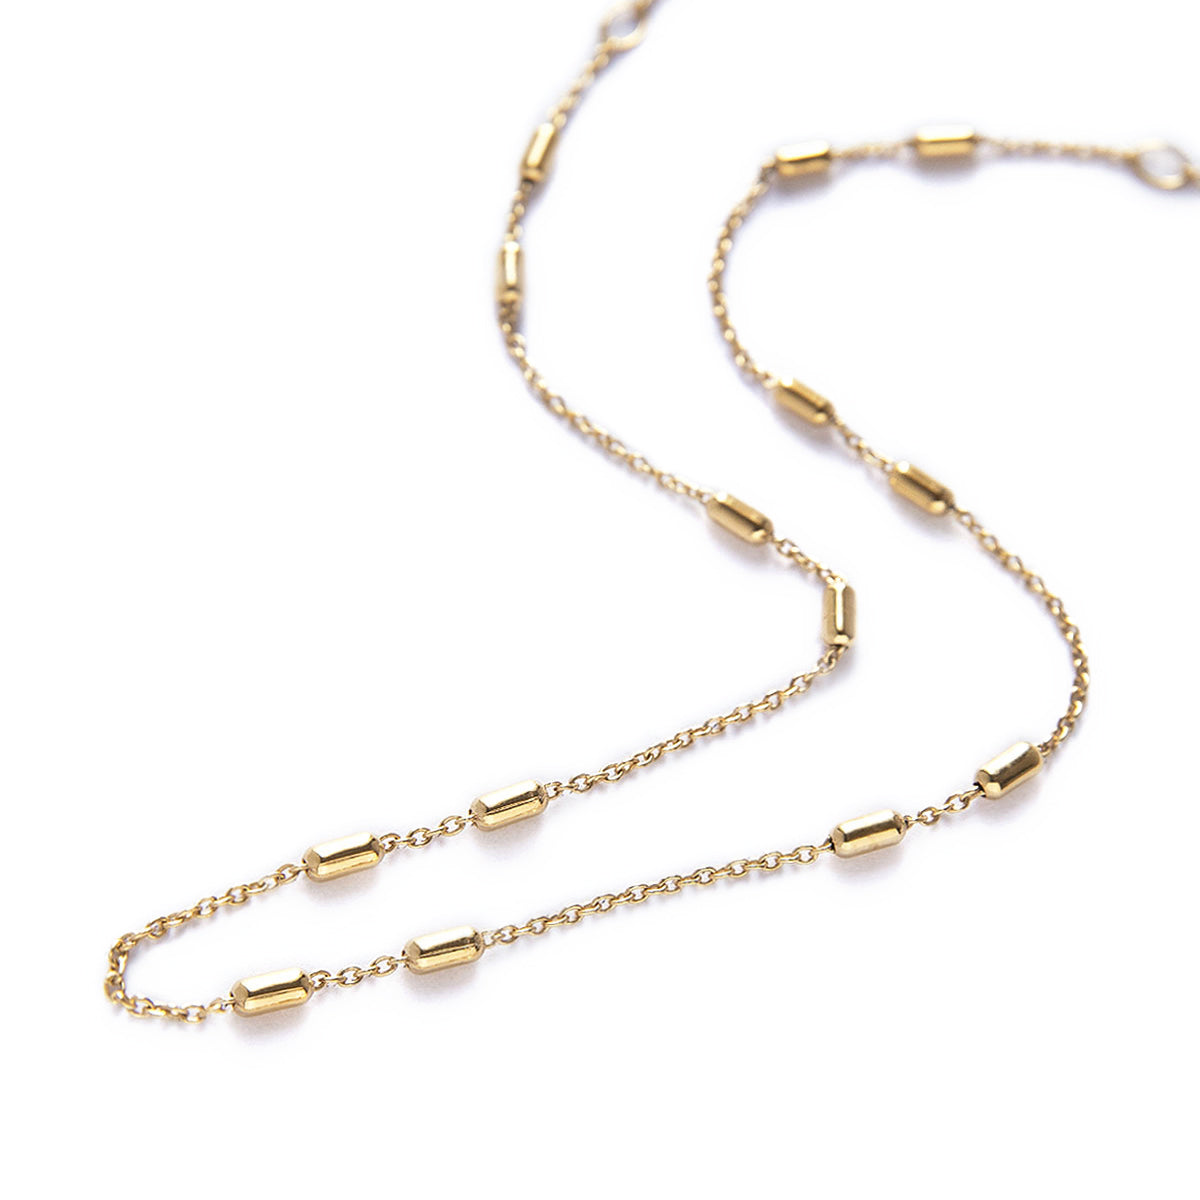 Gold Chain Necklace, Set of 2 - Choker & Tiny Star Bead Necklaces, Layered  Necklace for Women